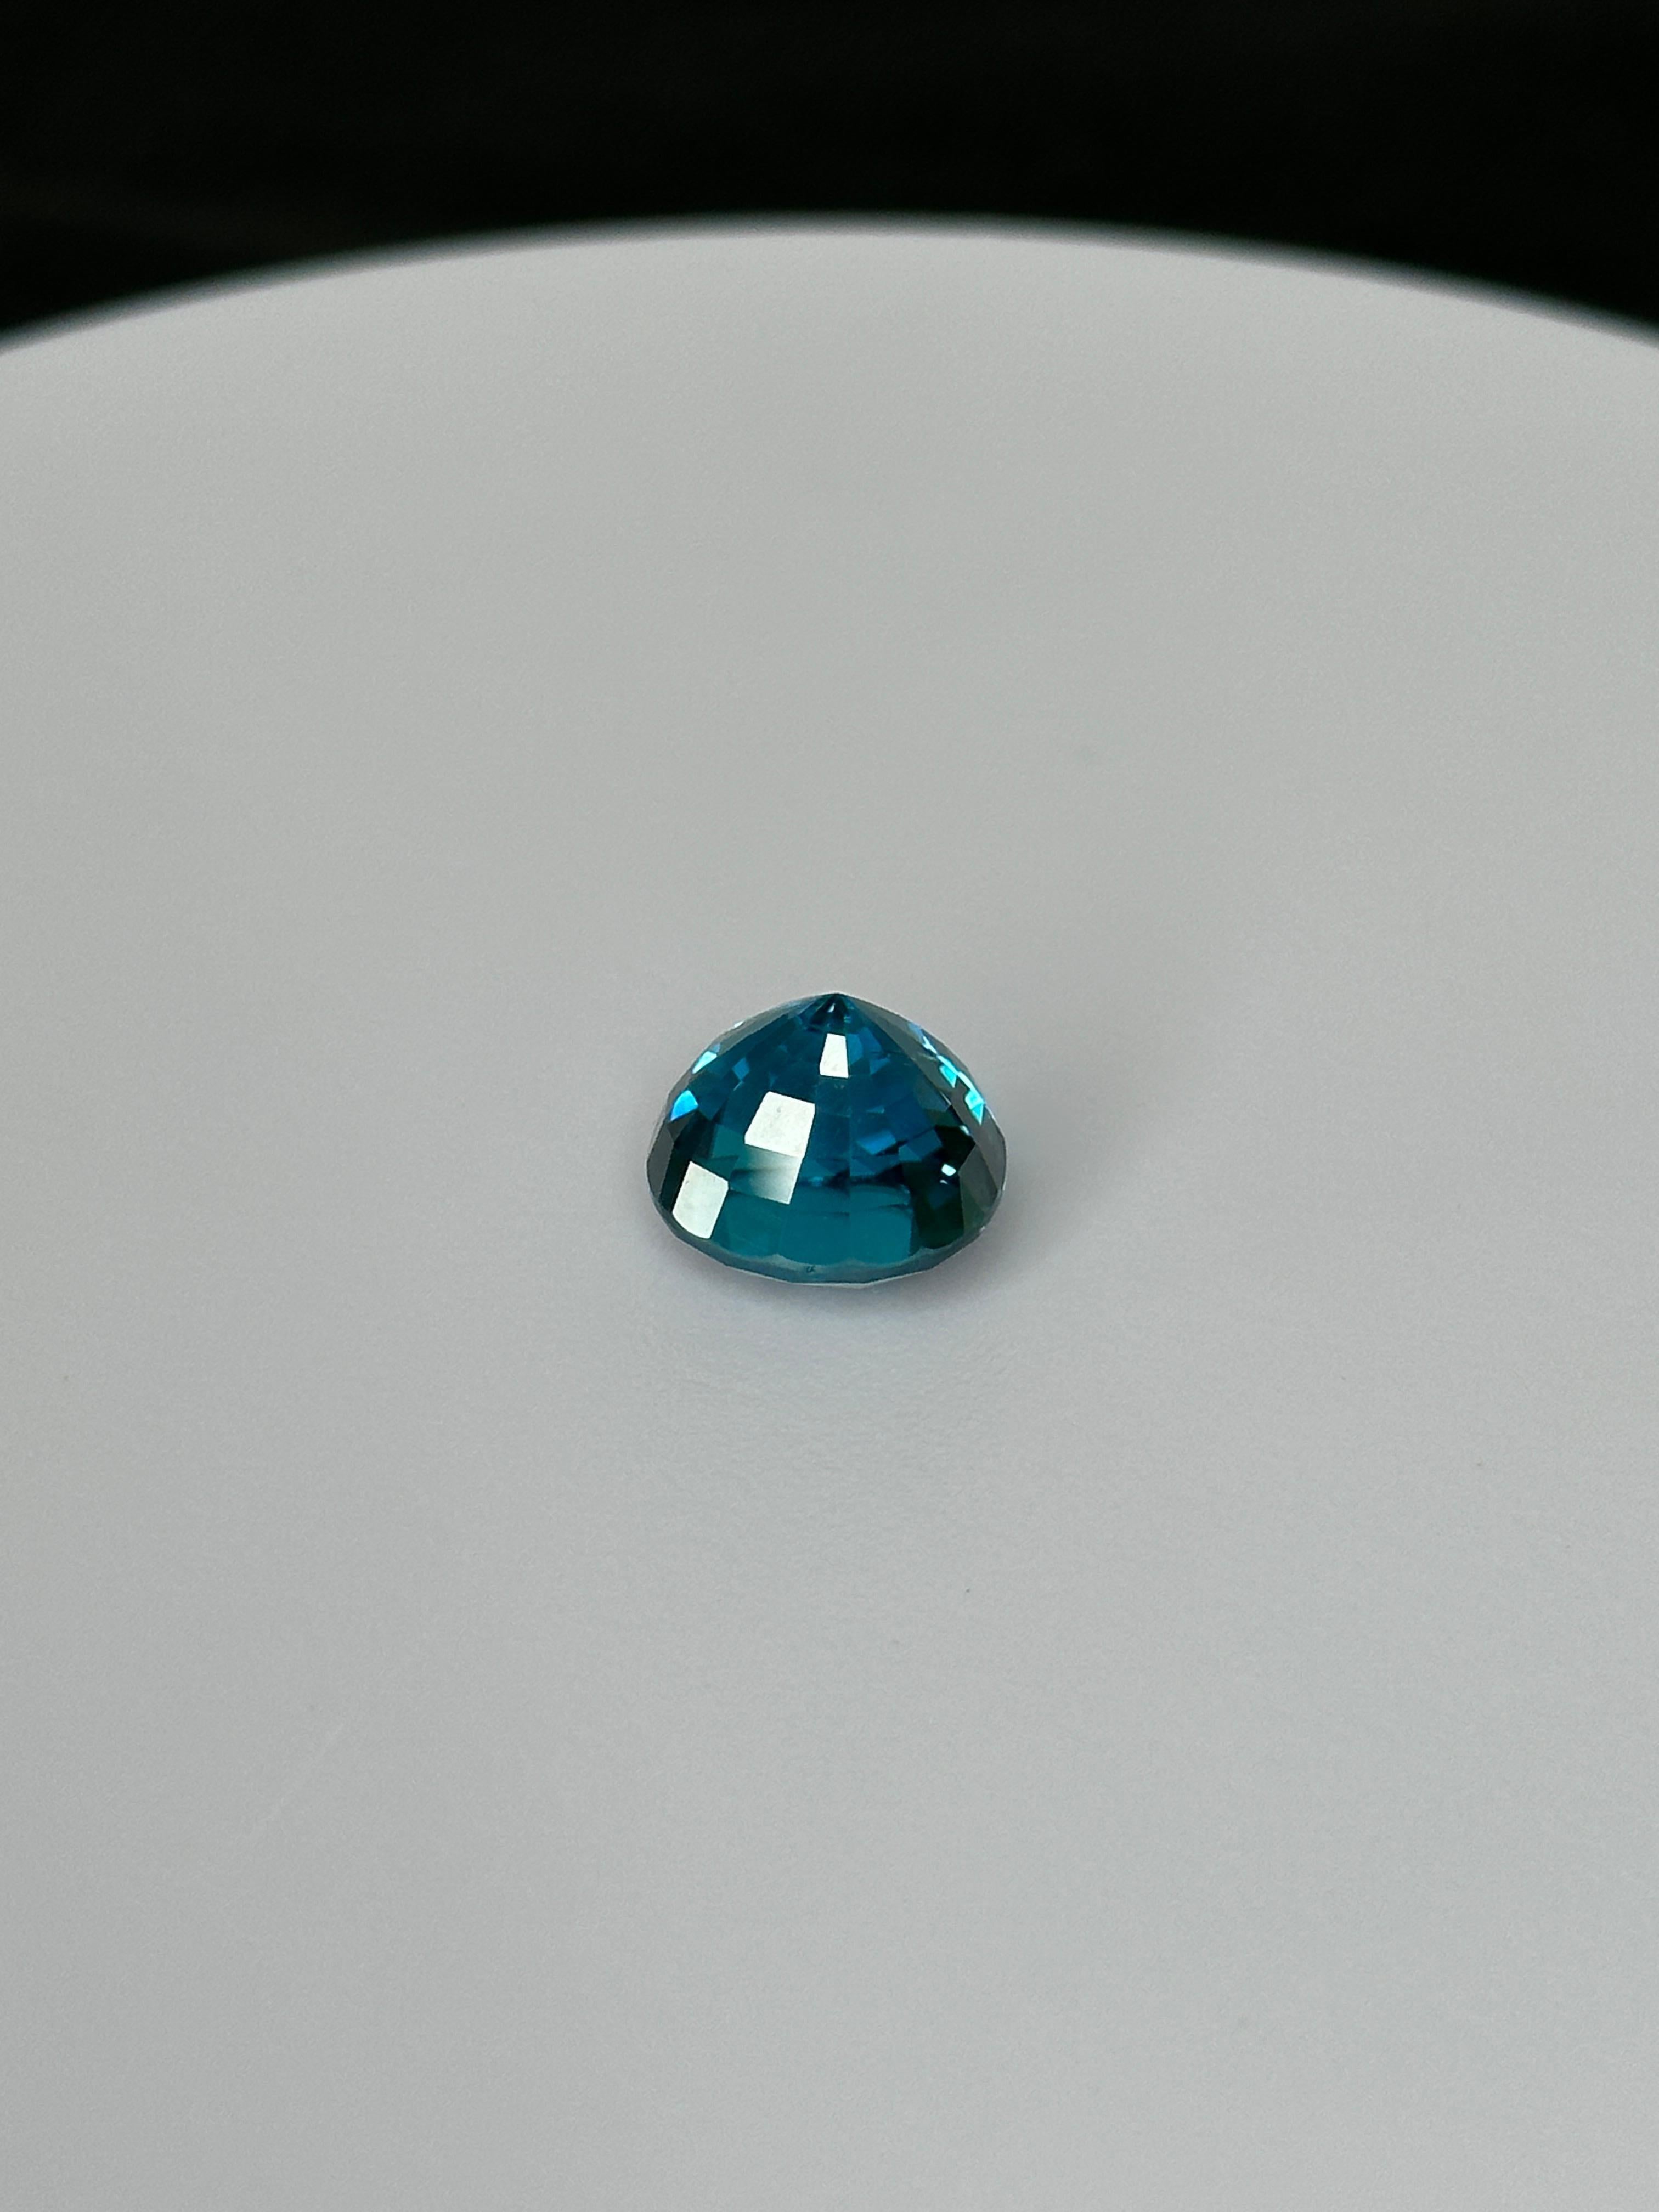 17 Carat Collector's Cambodian Blue Zircon For Sale 1